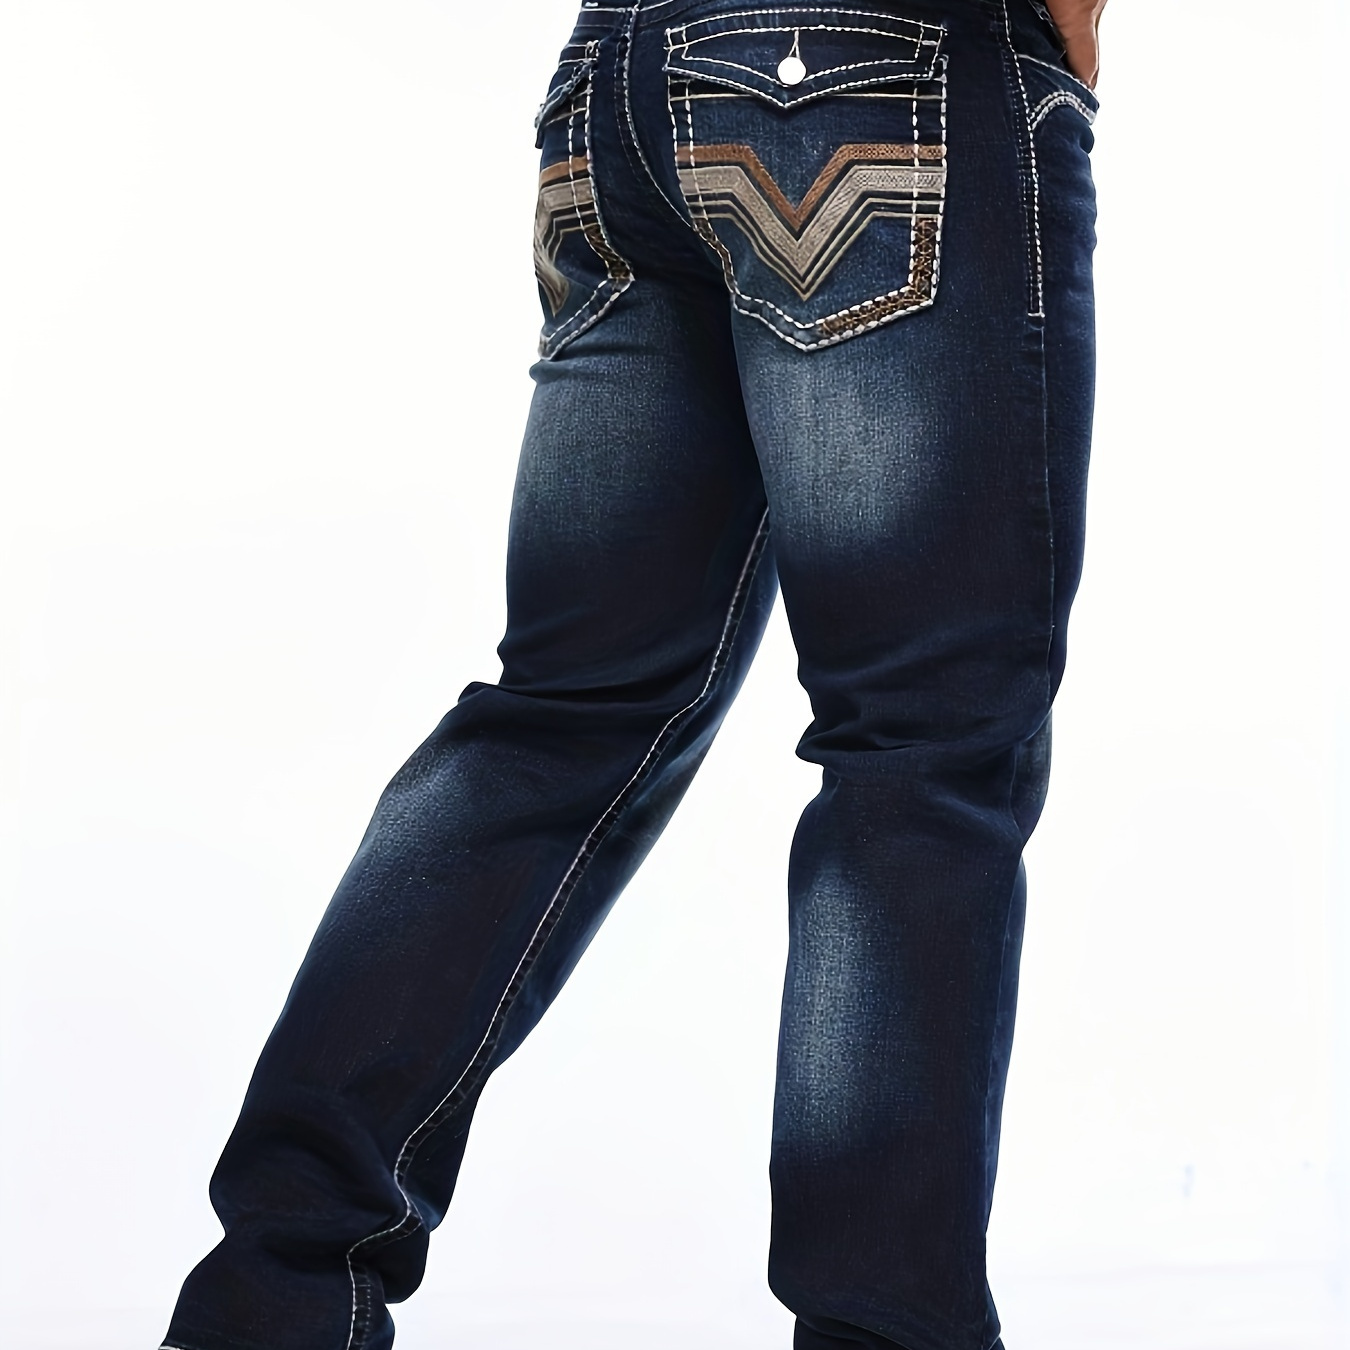 

Men's Slim Fit Distressed Jeans With Embroidered Design, Stylish Comfy Pants For All Season Wear